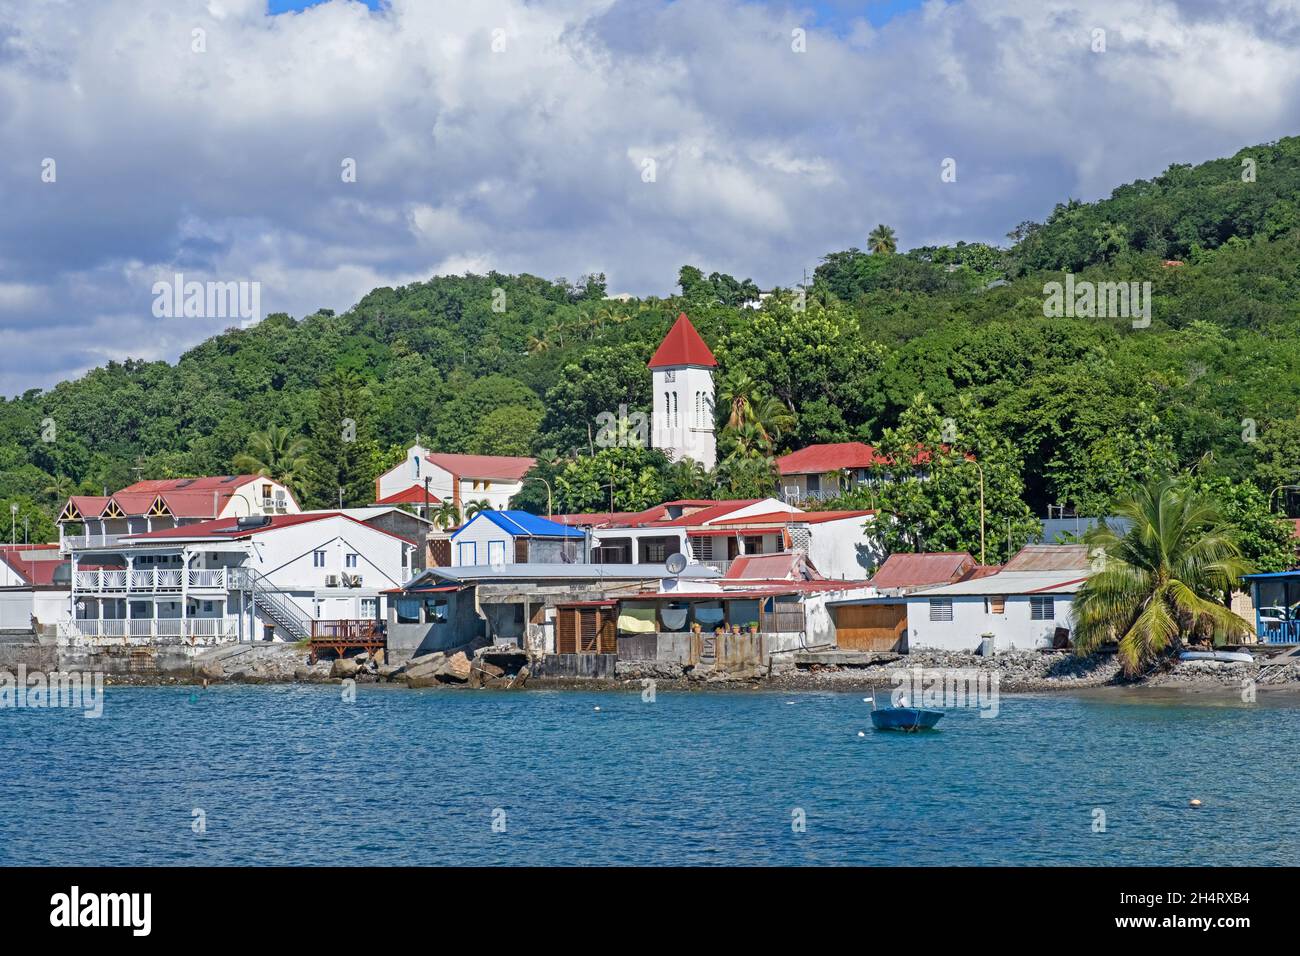 View over the village Deshaies on the northwest coast of Basse-Terre Island, archipelago of Guadeloupe, Lesser Antilles in the Caribbean Sea Stock Photo